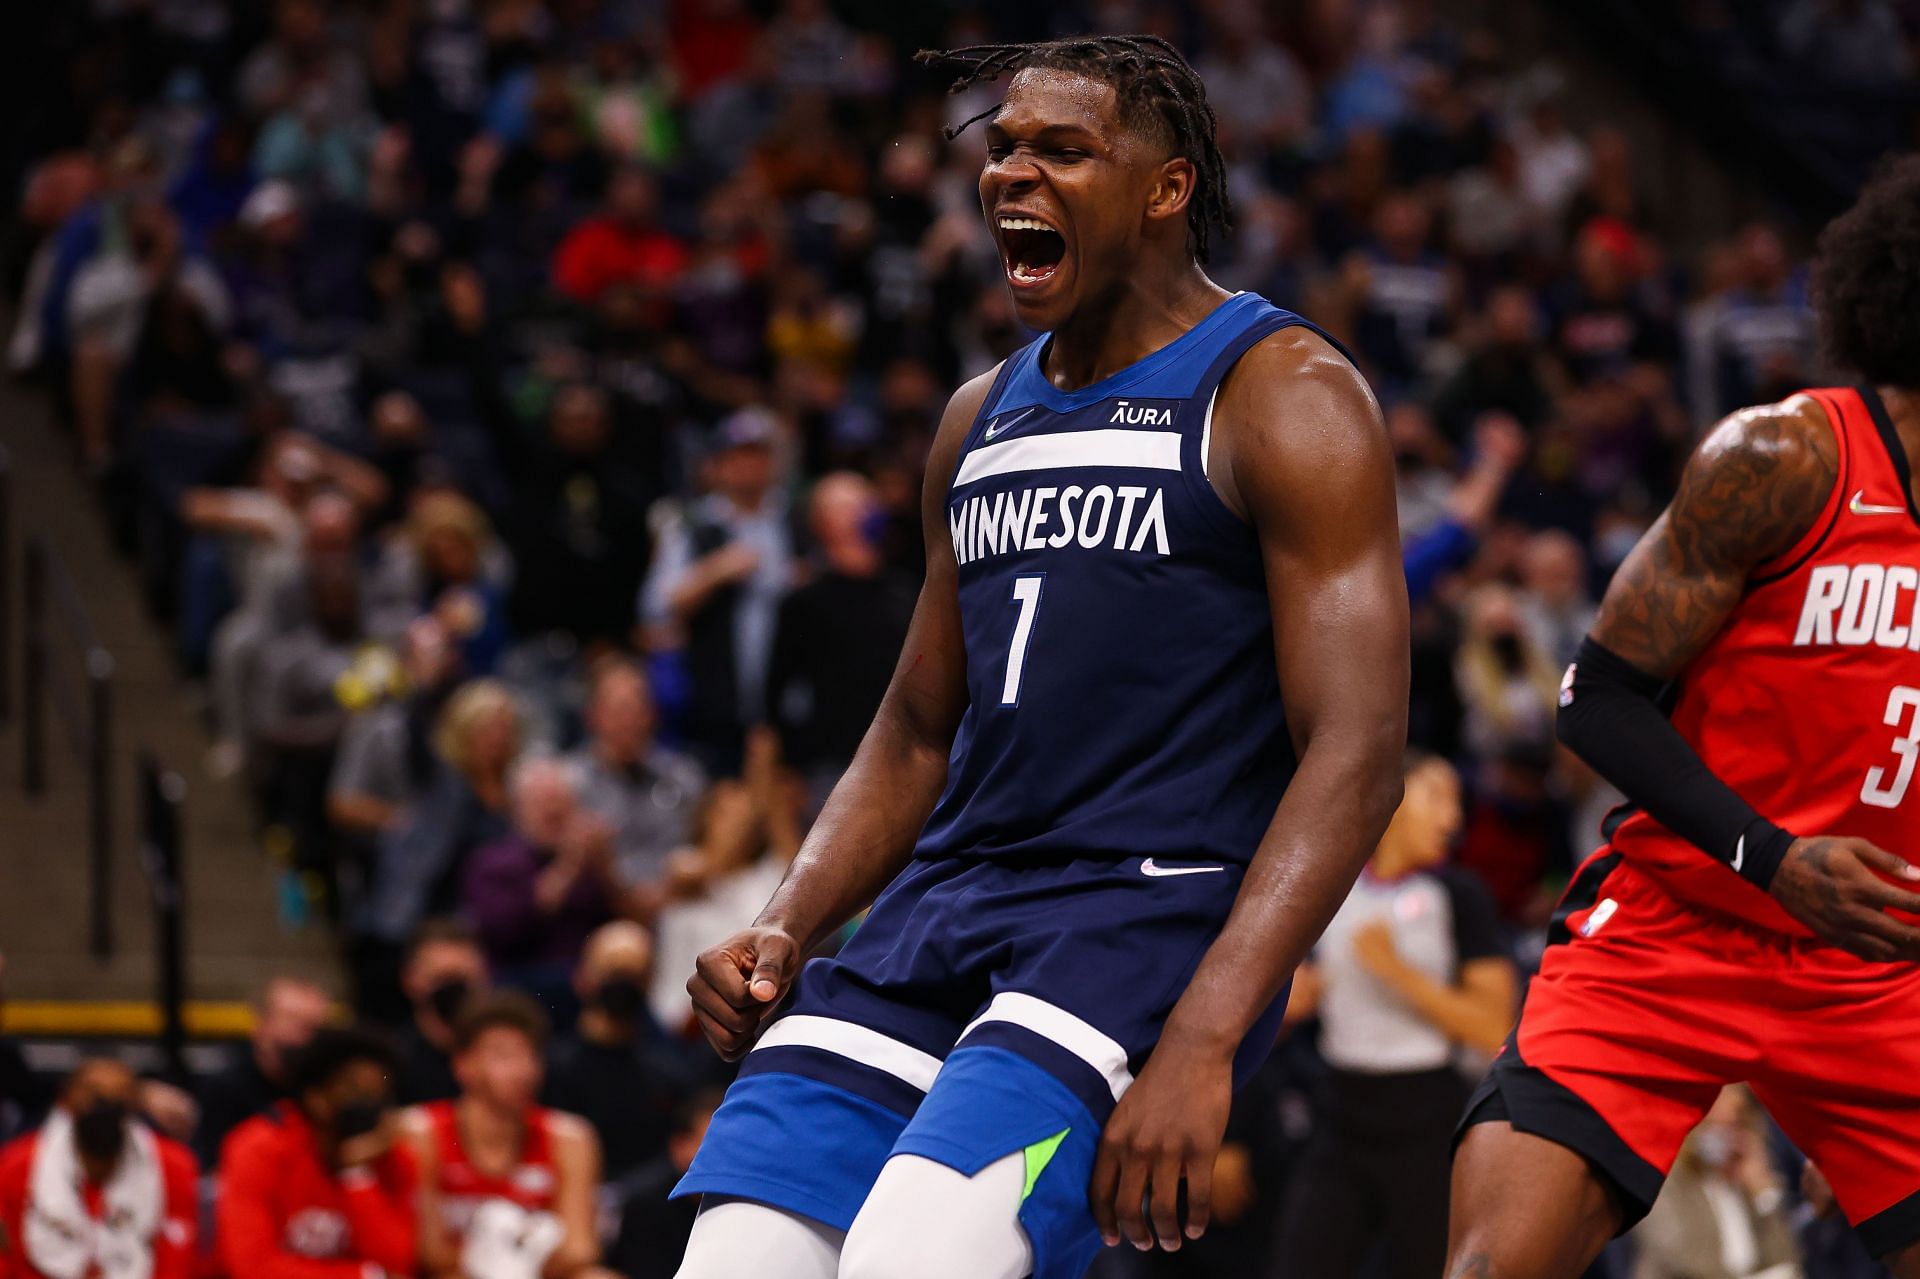 Anthony Edwards #1 of the Minnesota Timberwolves reacts after dunking the ball during the fourth quarter against the Houston Rockets at Target Center on October 20, 2021 in Minneapolis, Minnesota.